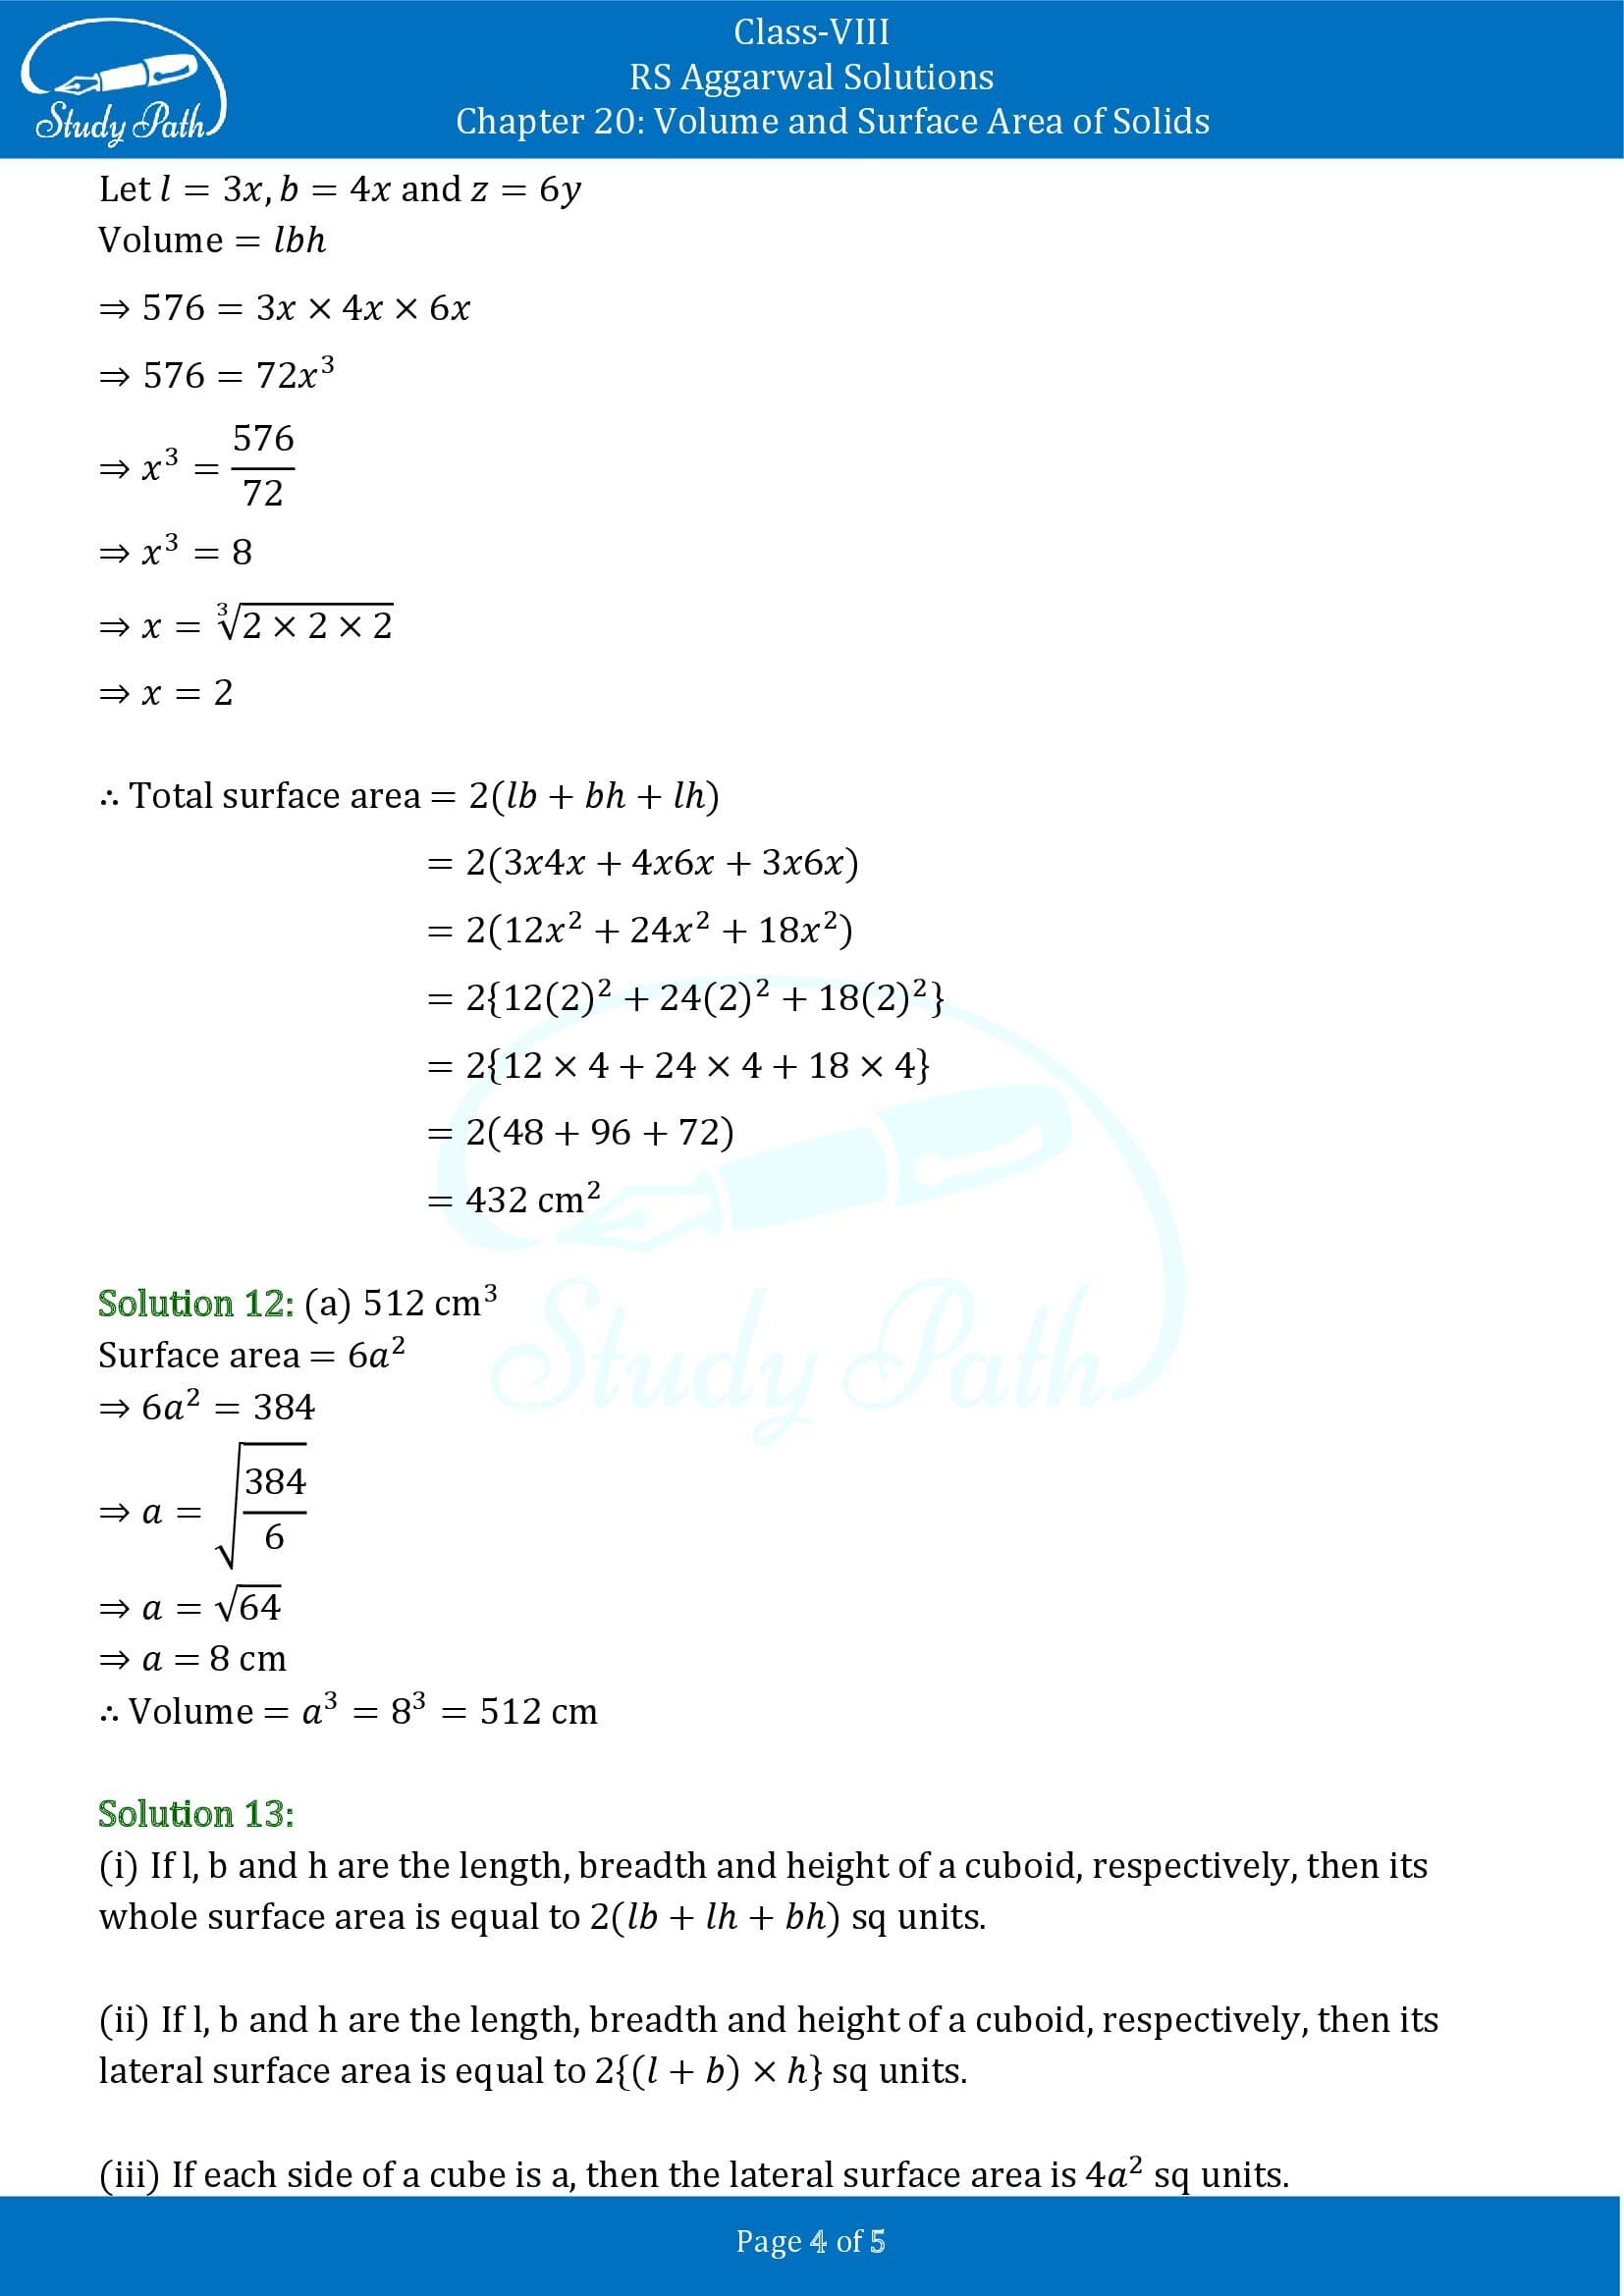 RS Aggarwal Solutions Class 8 Chapter 20 Volume and Surface Area of Solids Test Paper 00004